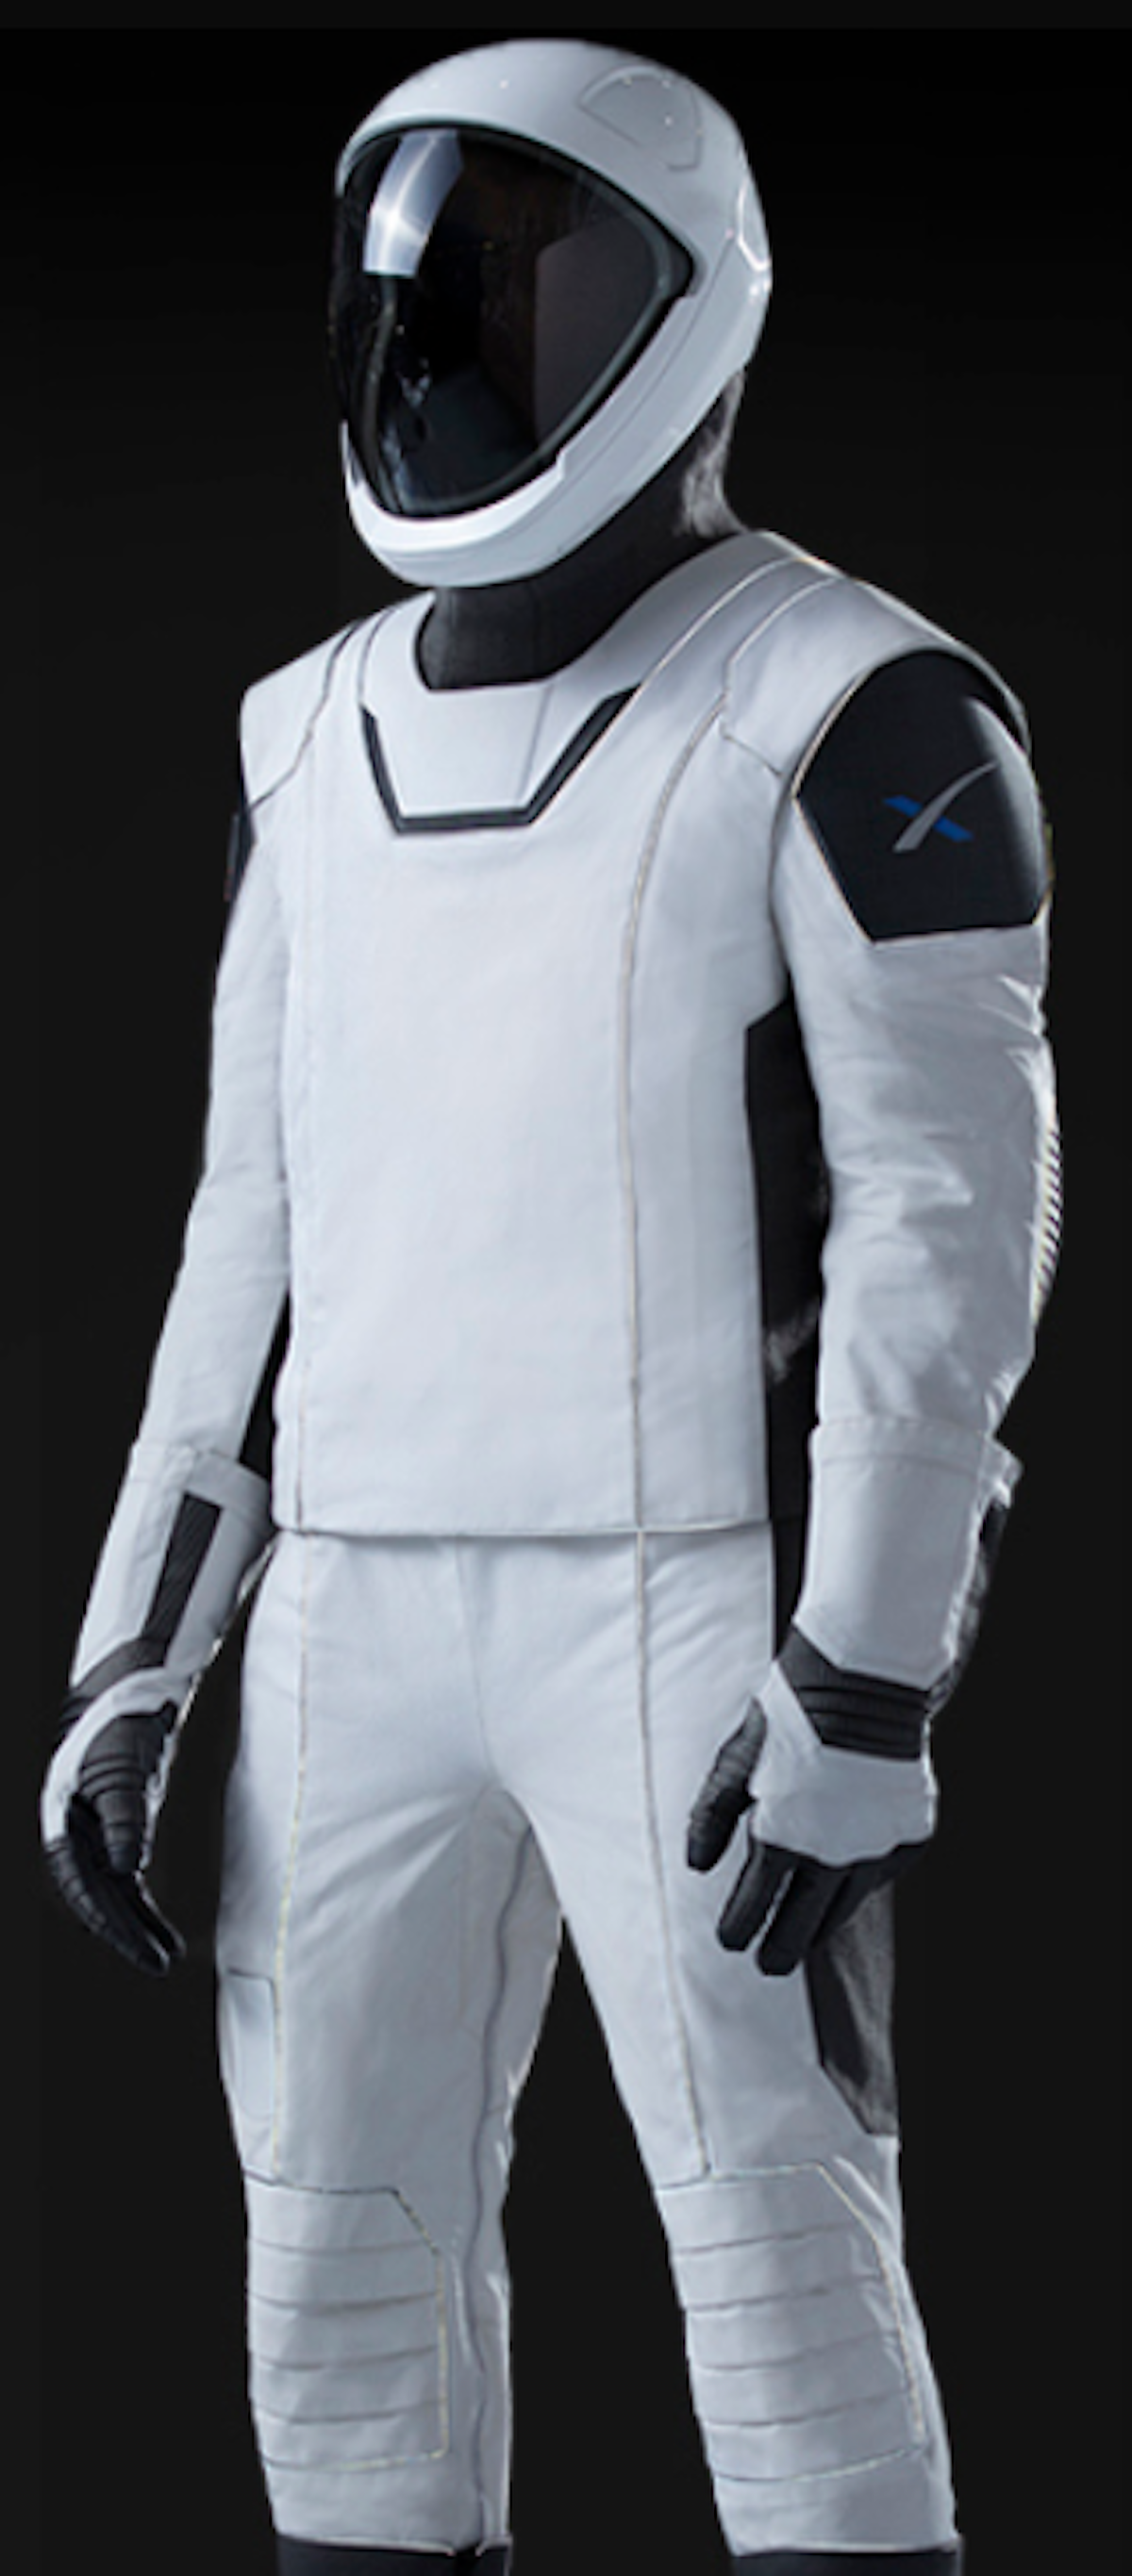 Spacex Space Suit / Elon Musk Unveils The First Spacex Space Suit Extremetech / Submitted 4 ...